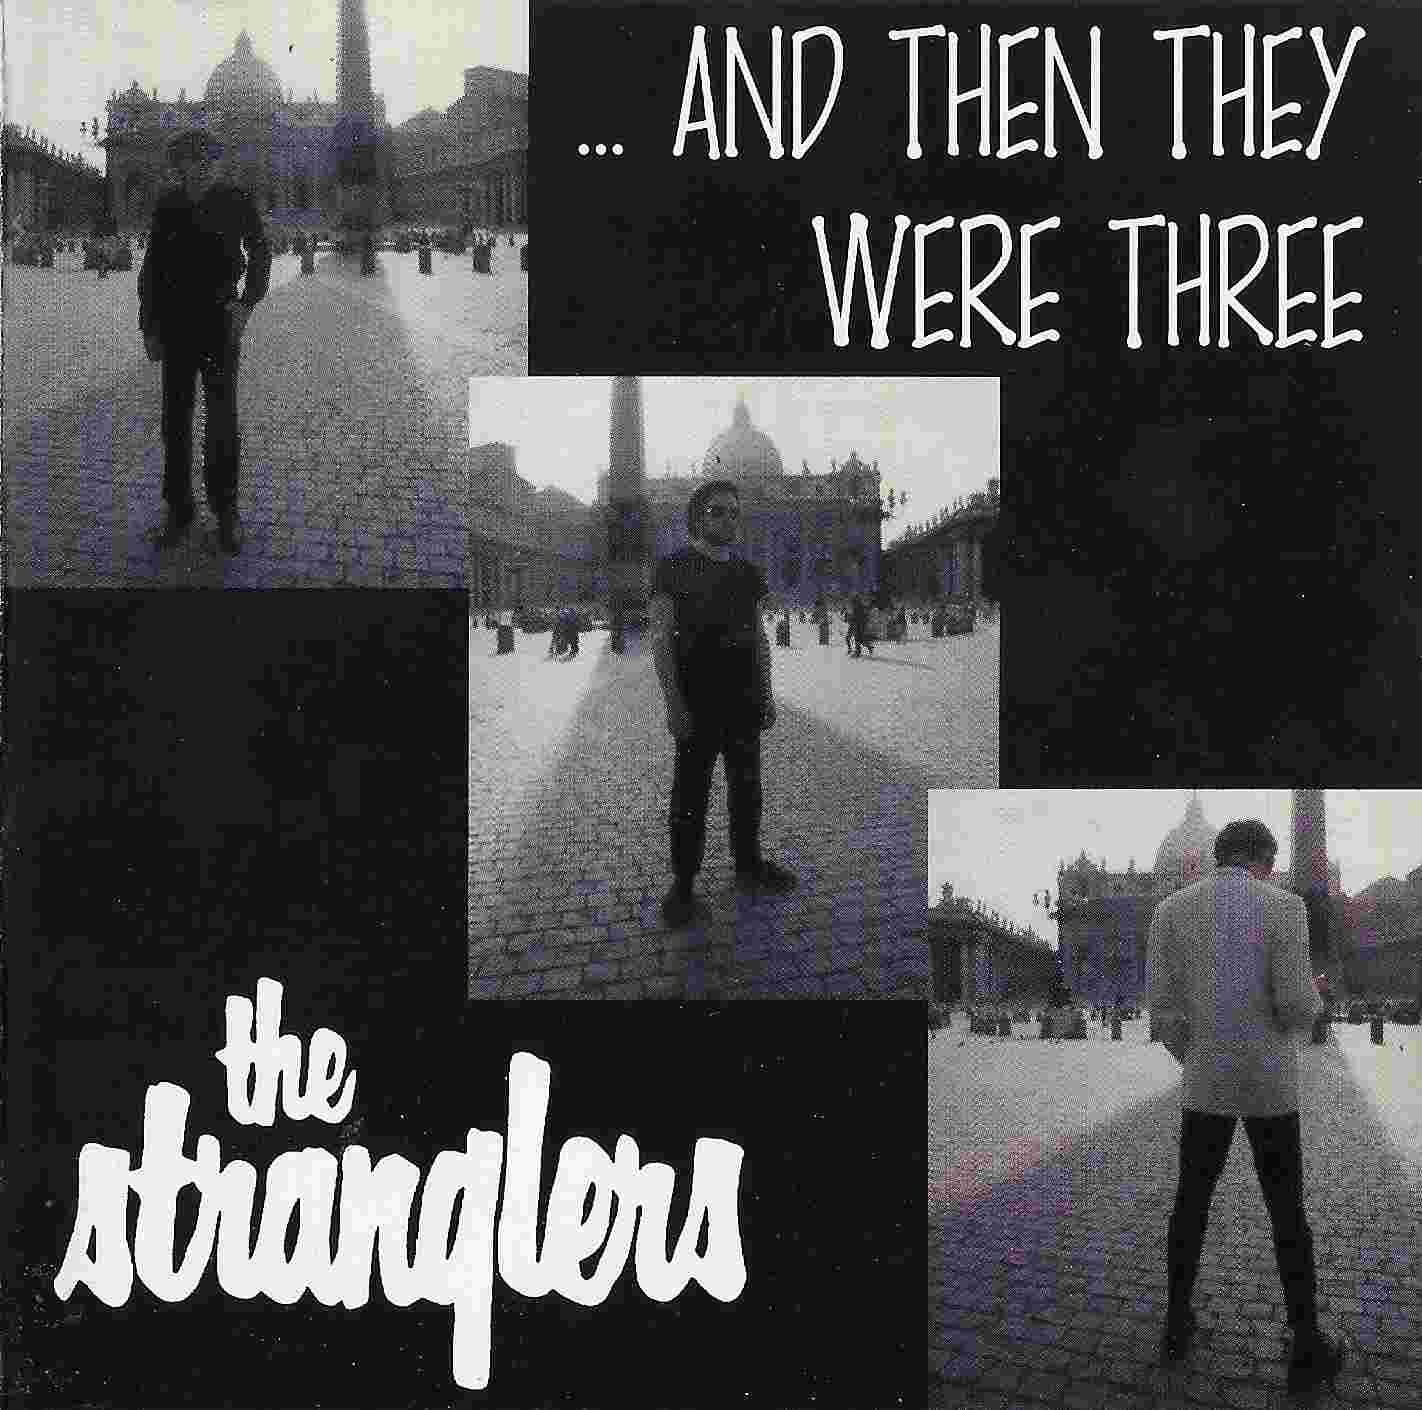 Picture of IST 57 And then they were three by artist The Stranglers from The Stranglers